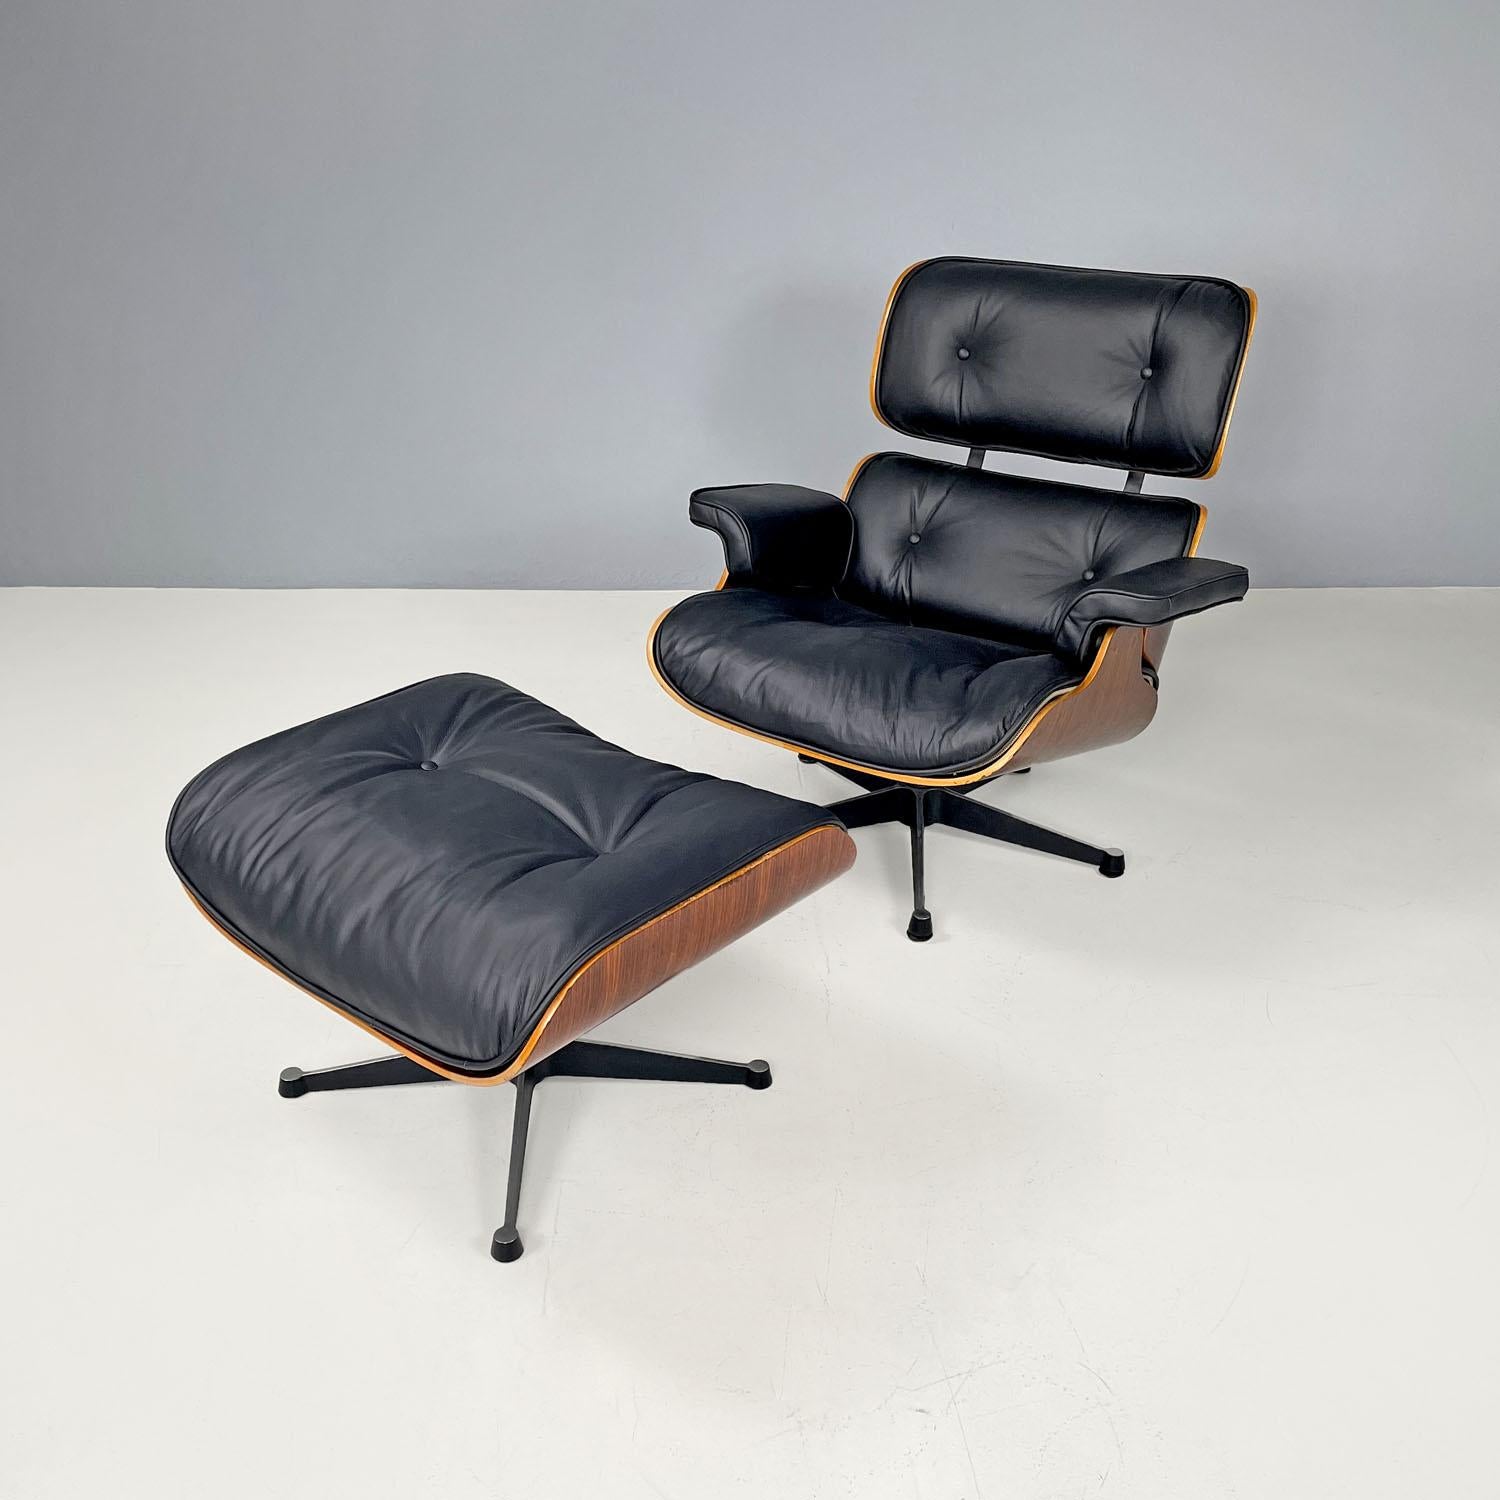 American modern black leather lounge chair 670 671 by Eames for Miller, 1970s
Set of armchair and ottoman mod. 670 and 671 with wooden body. The armchair is composed of a square seat and backrest with rounded corners, fully padded and covered in